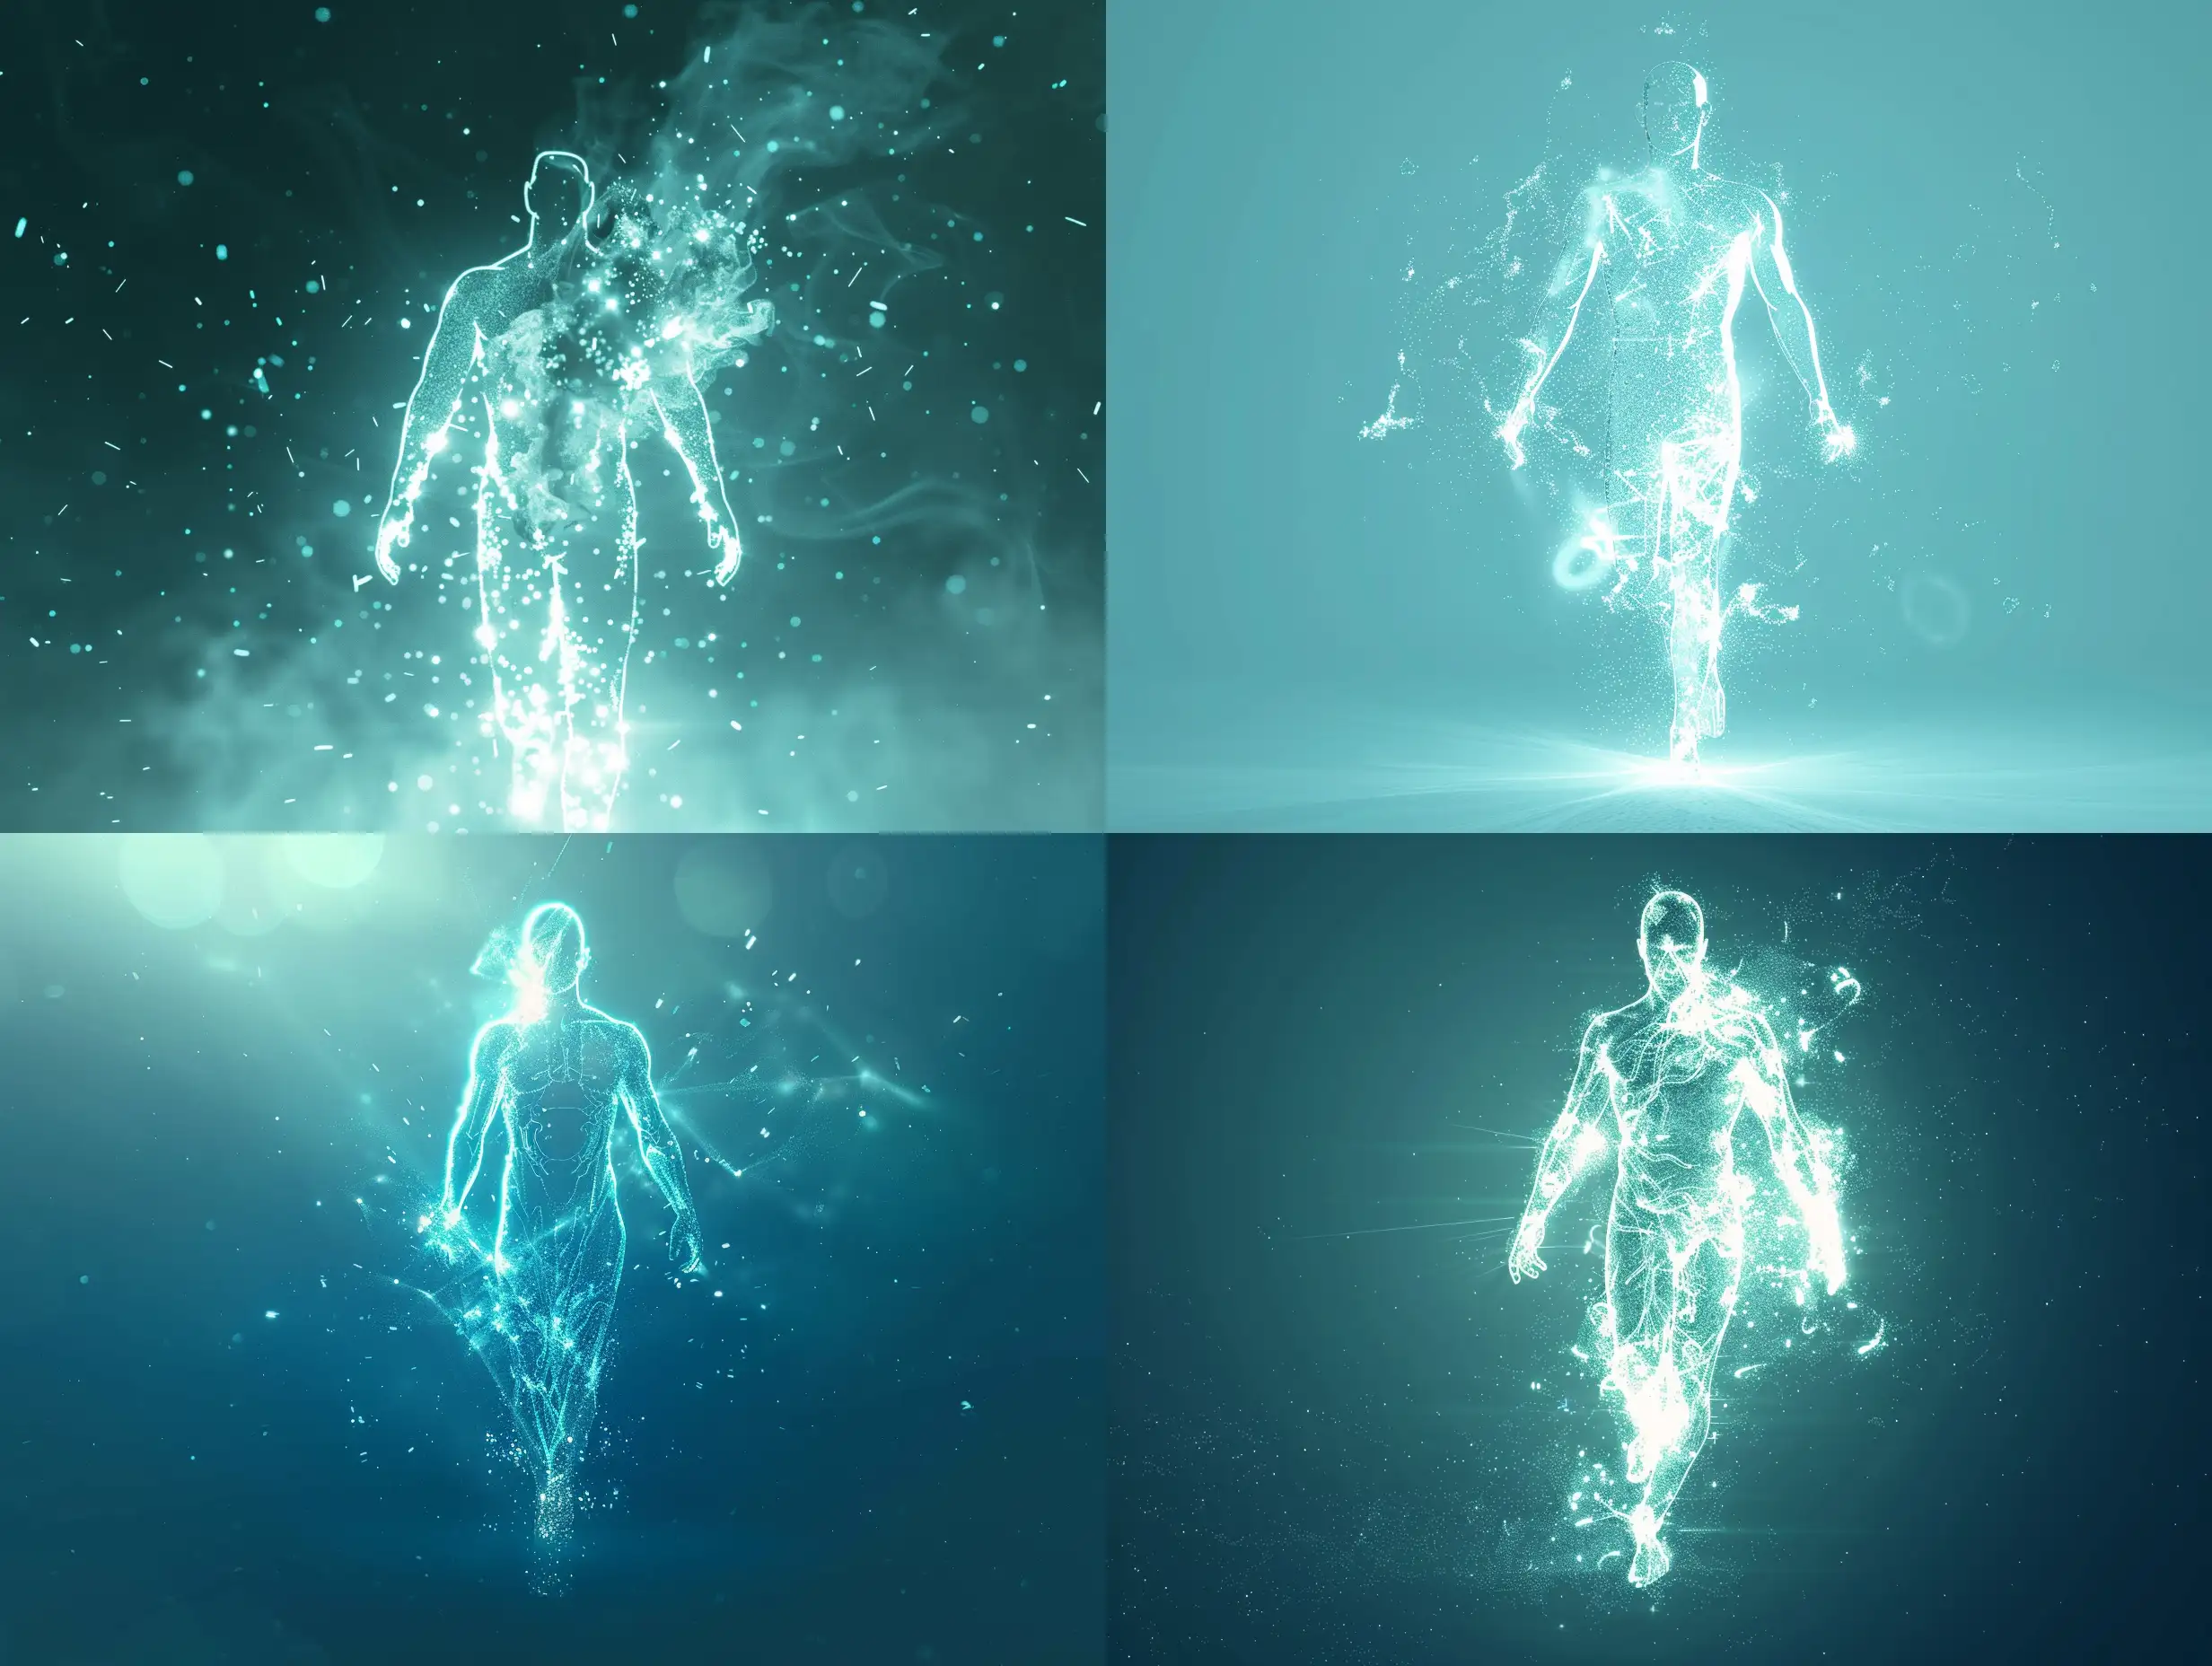 Translucent-Human-Dissolving-into-Cyan-Particles-with-Dynamic-Forces